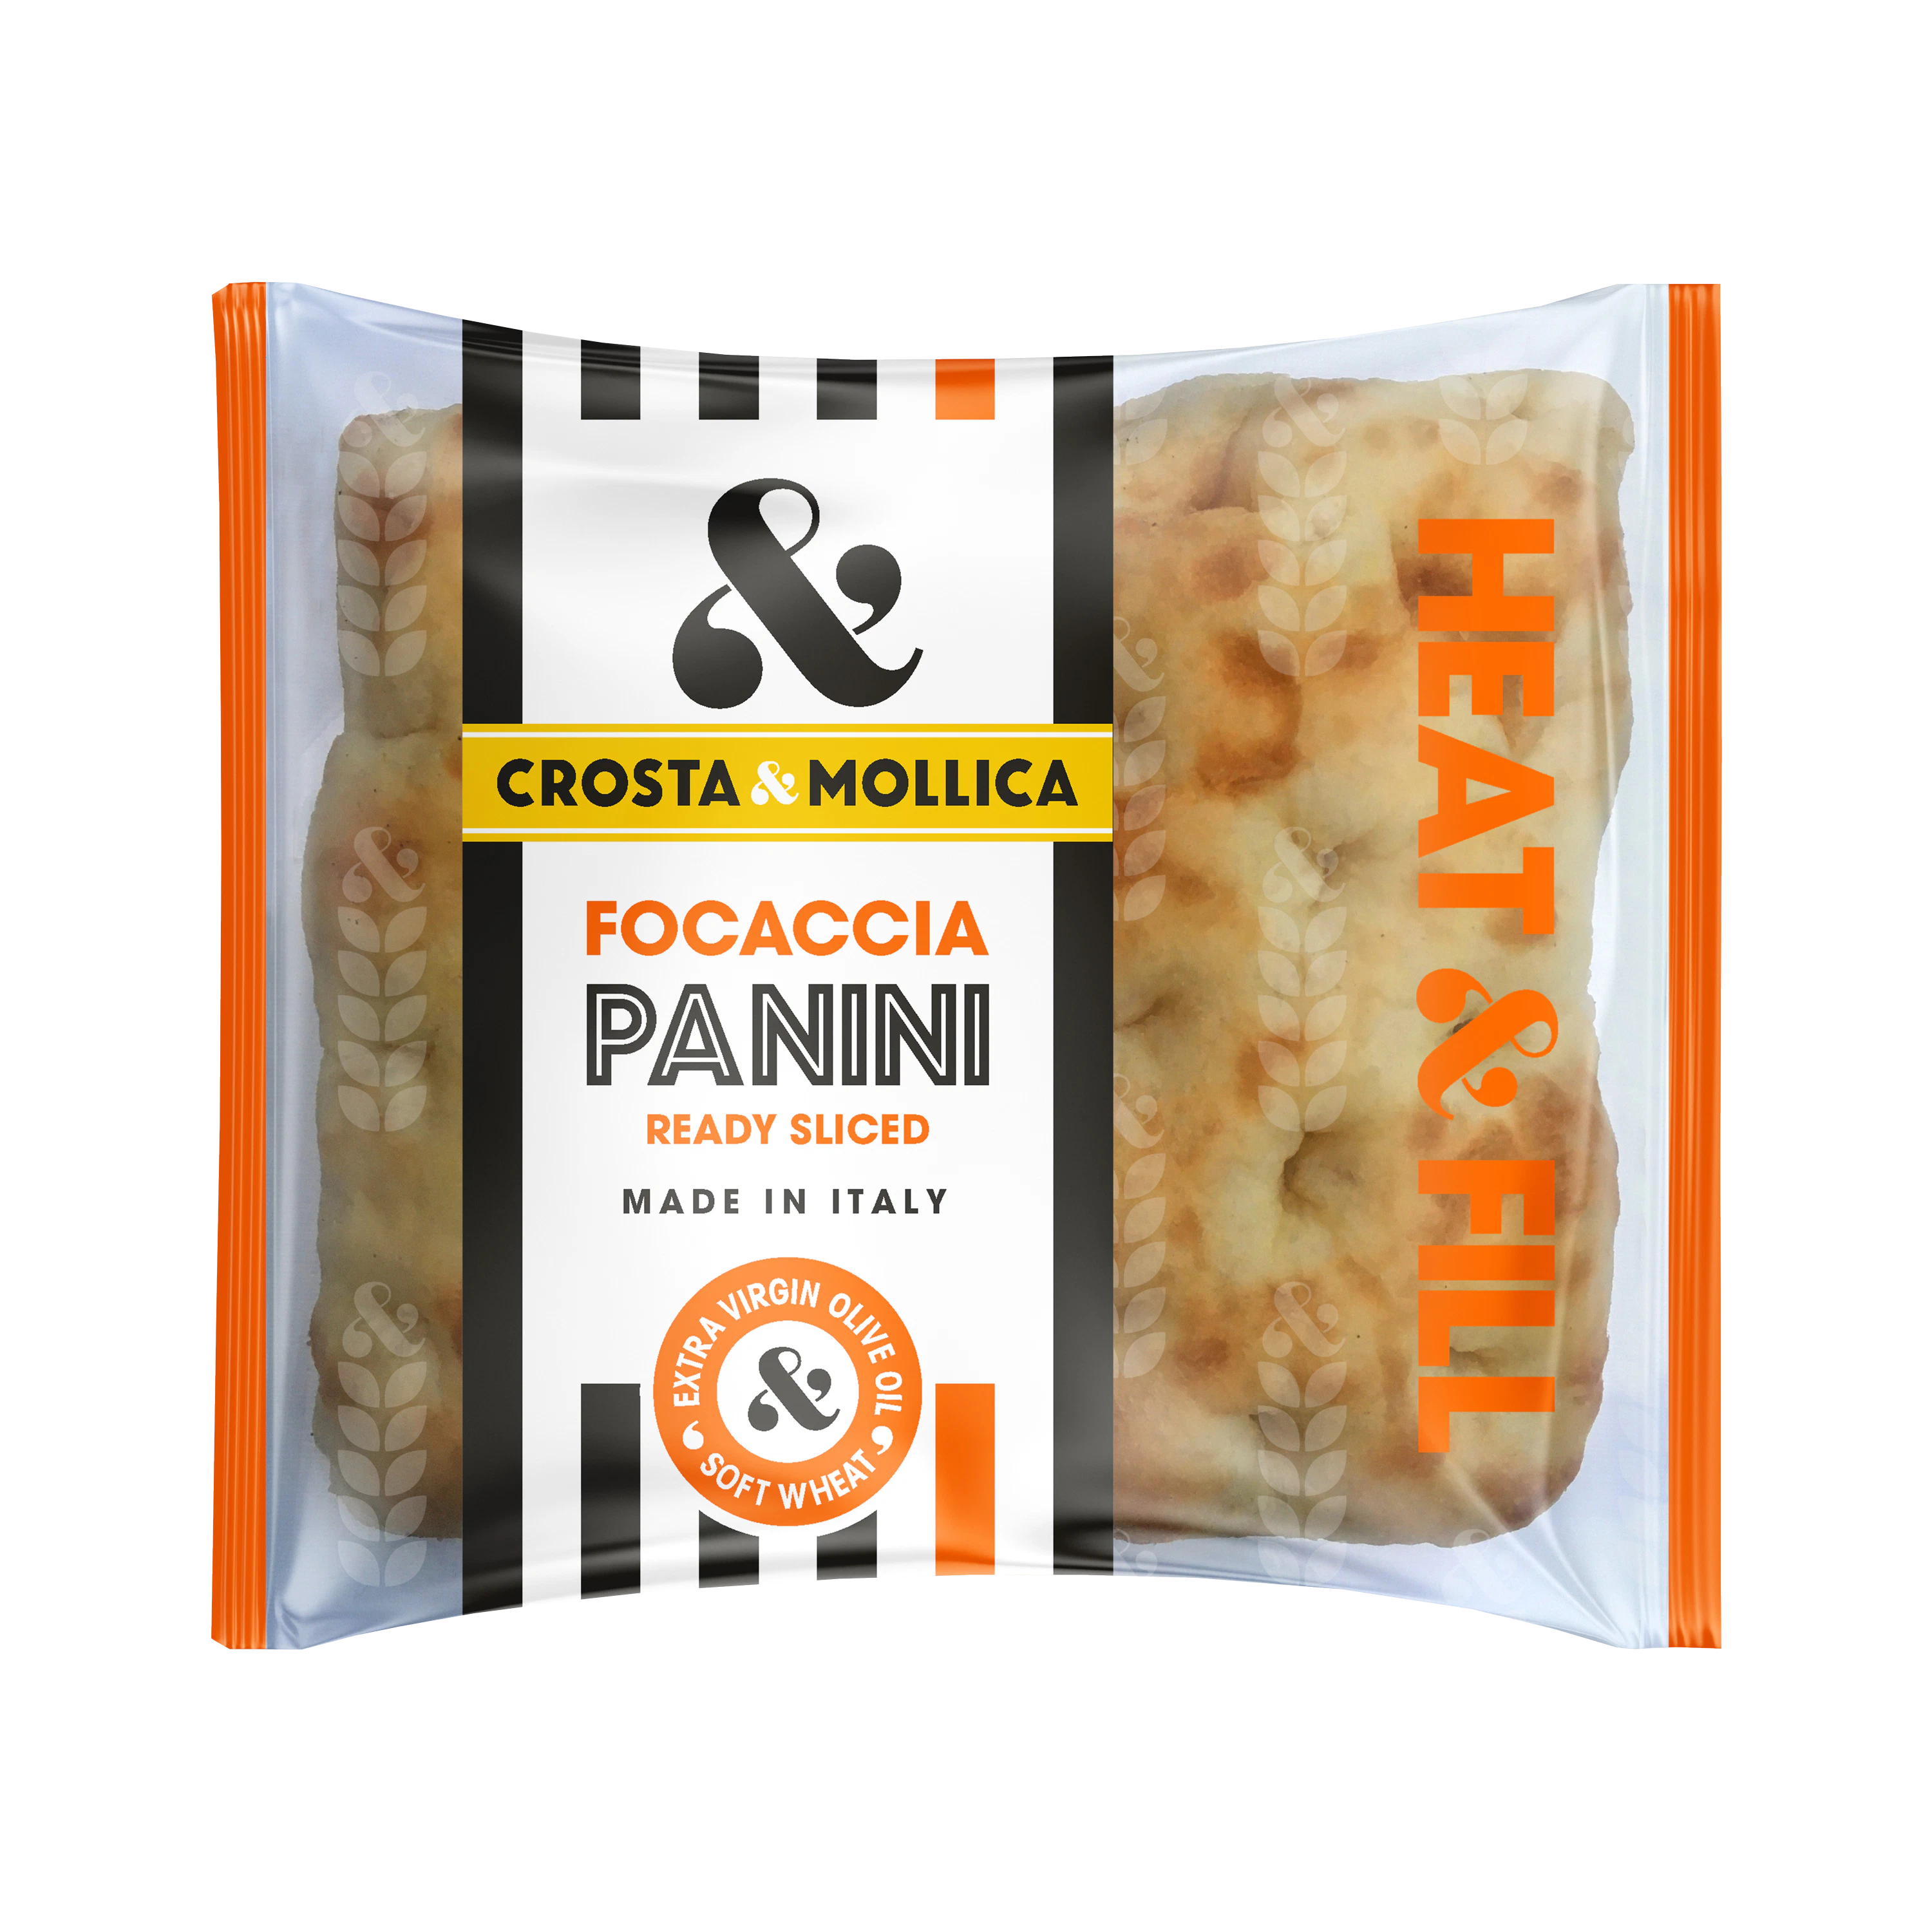 Focaccia Panini packaging, two loaves are visible through the packet.